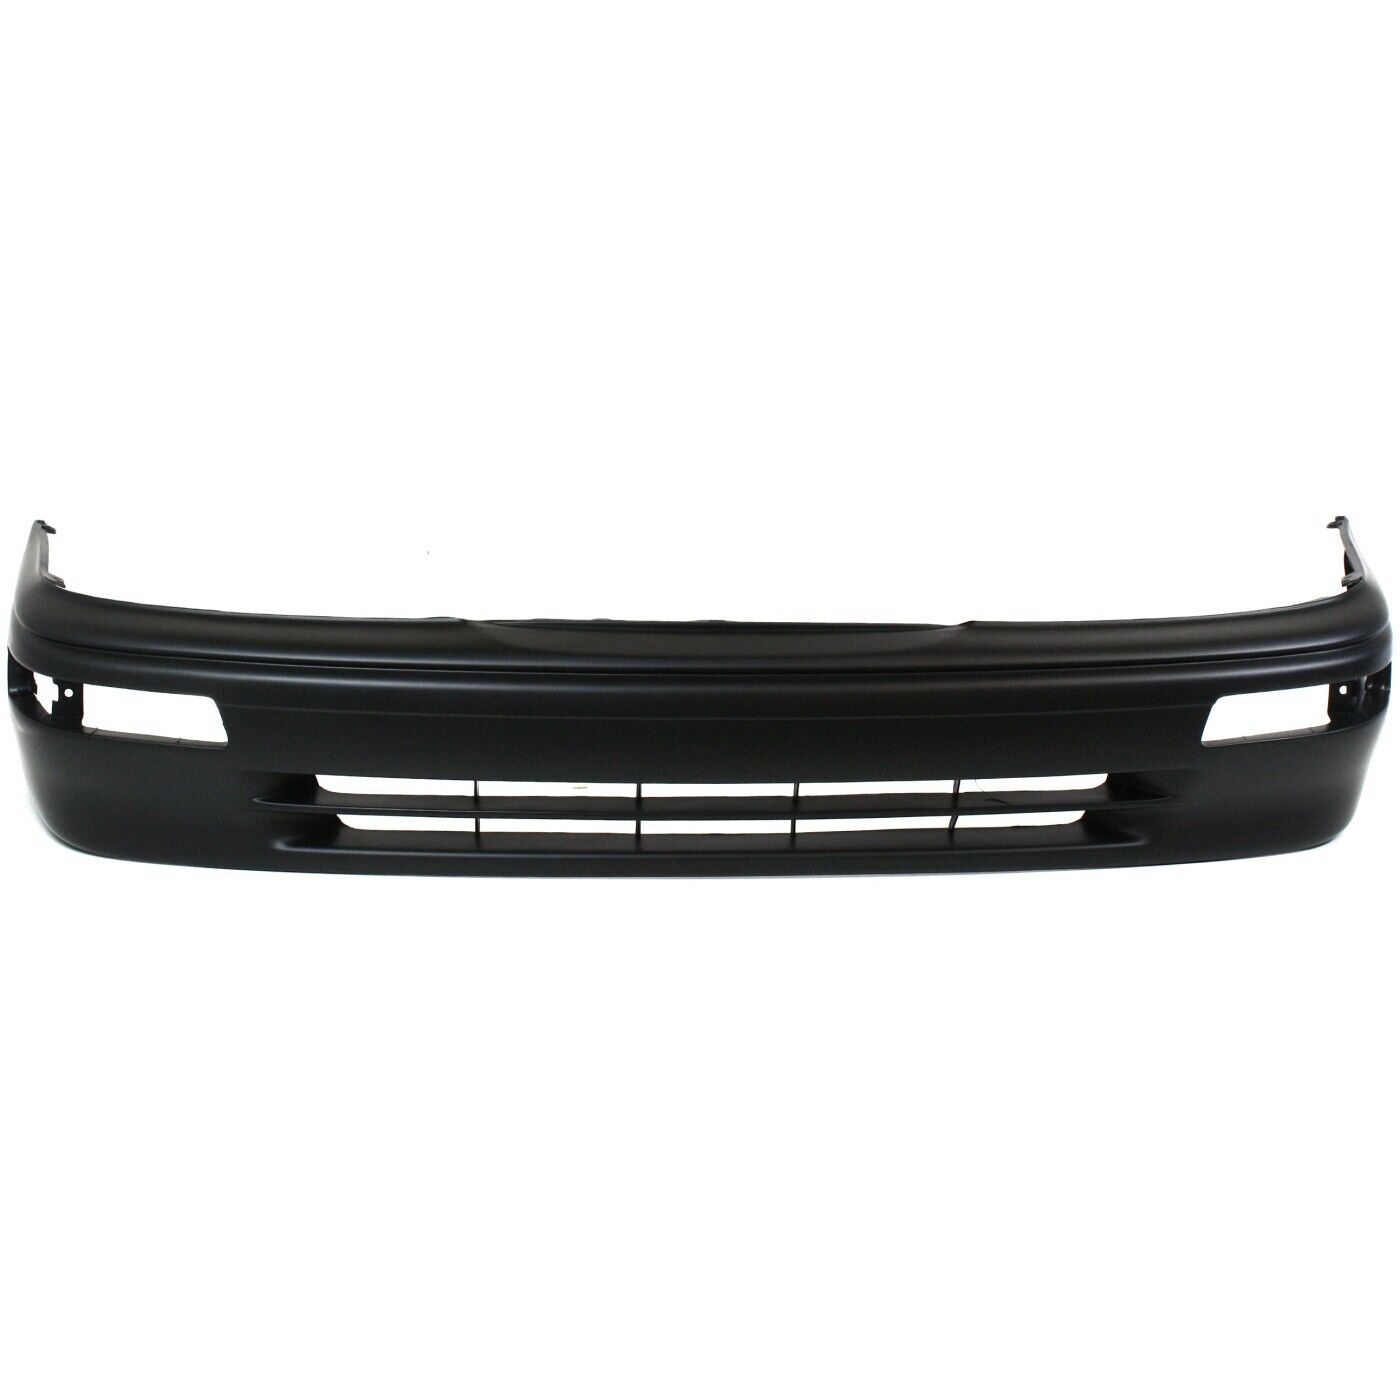 Front Bumper Cover For 95-97 Toyota Avalon w/ fog lamp holes Primed